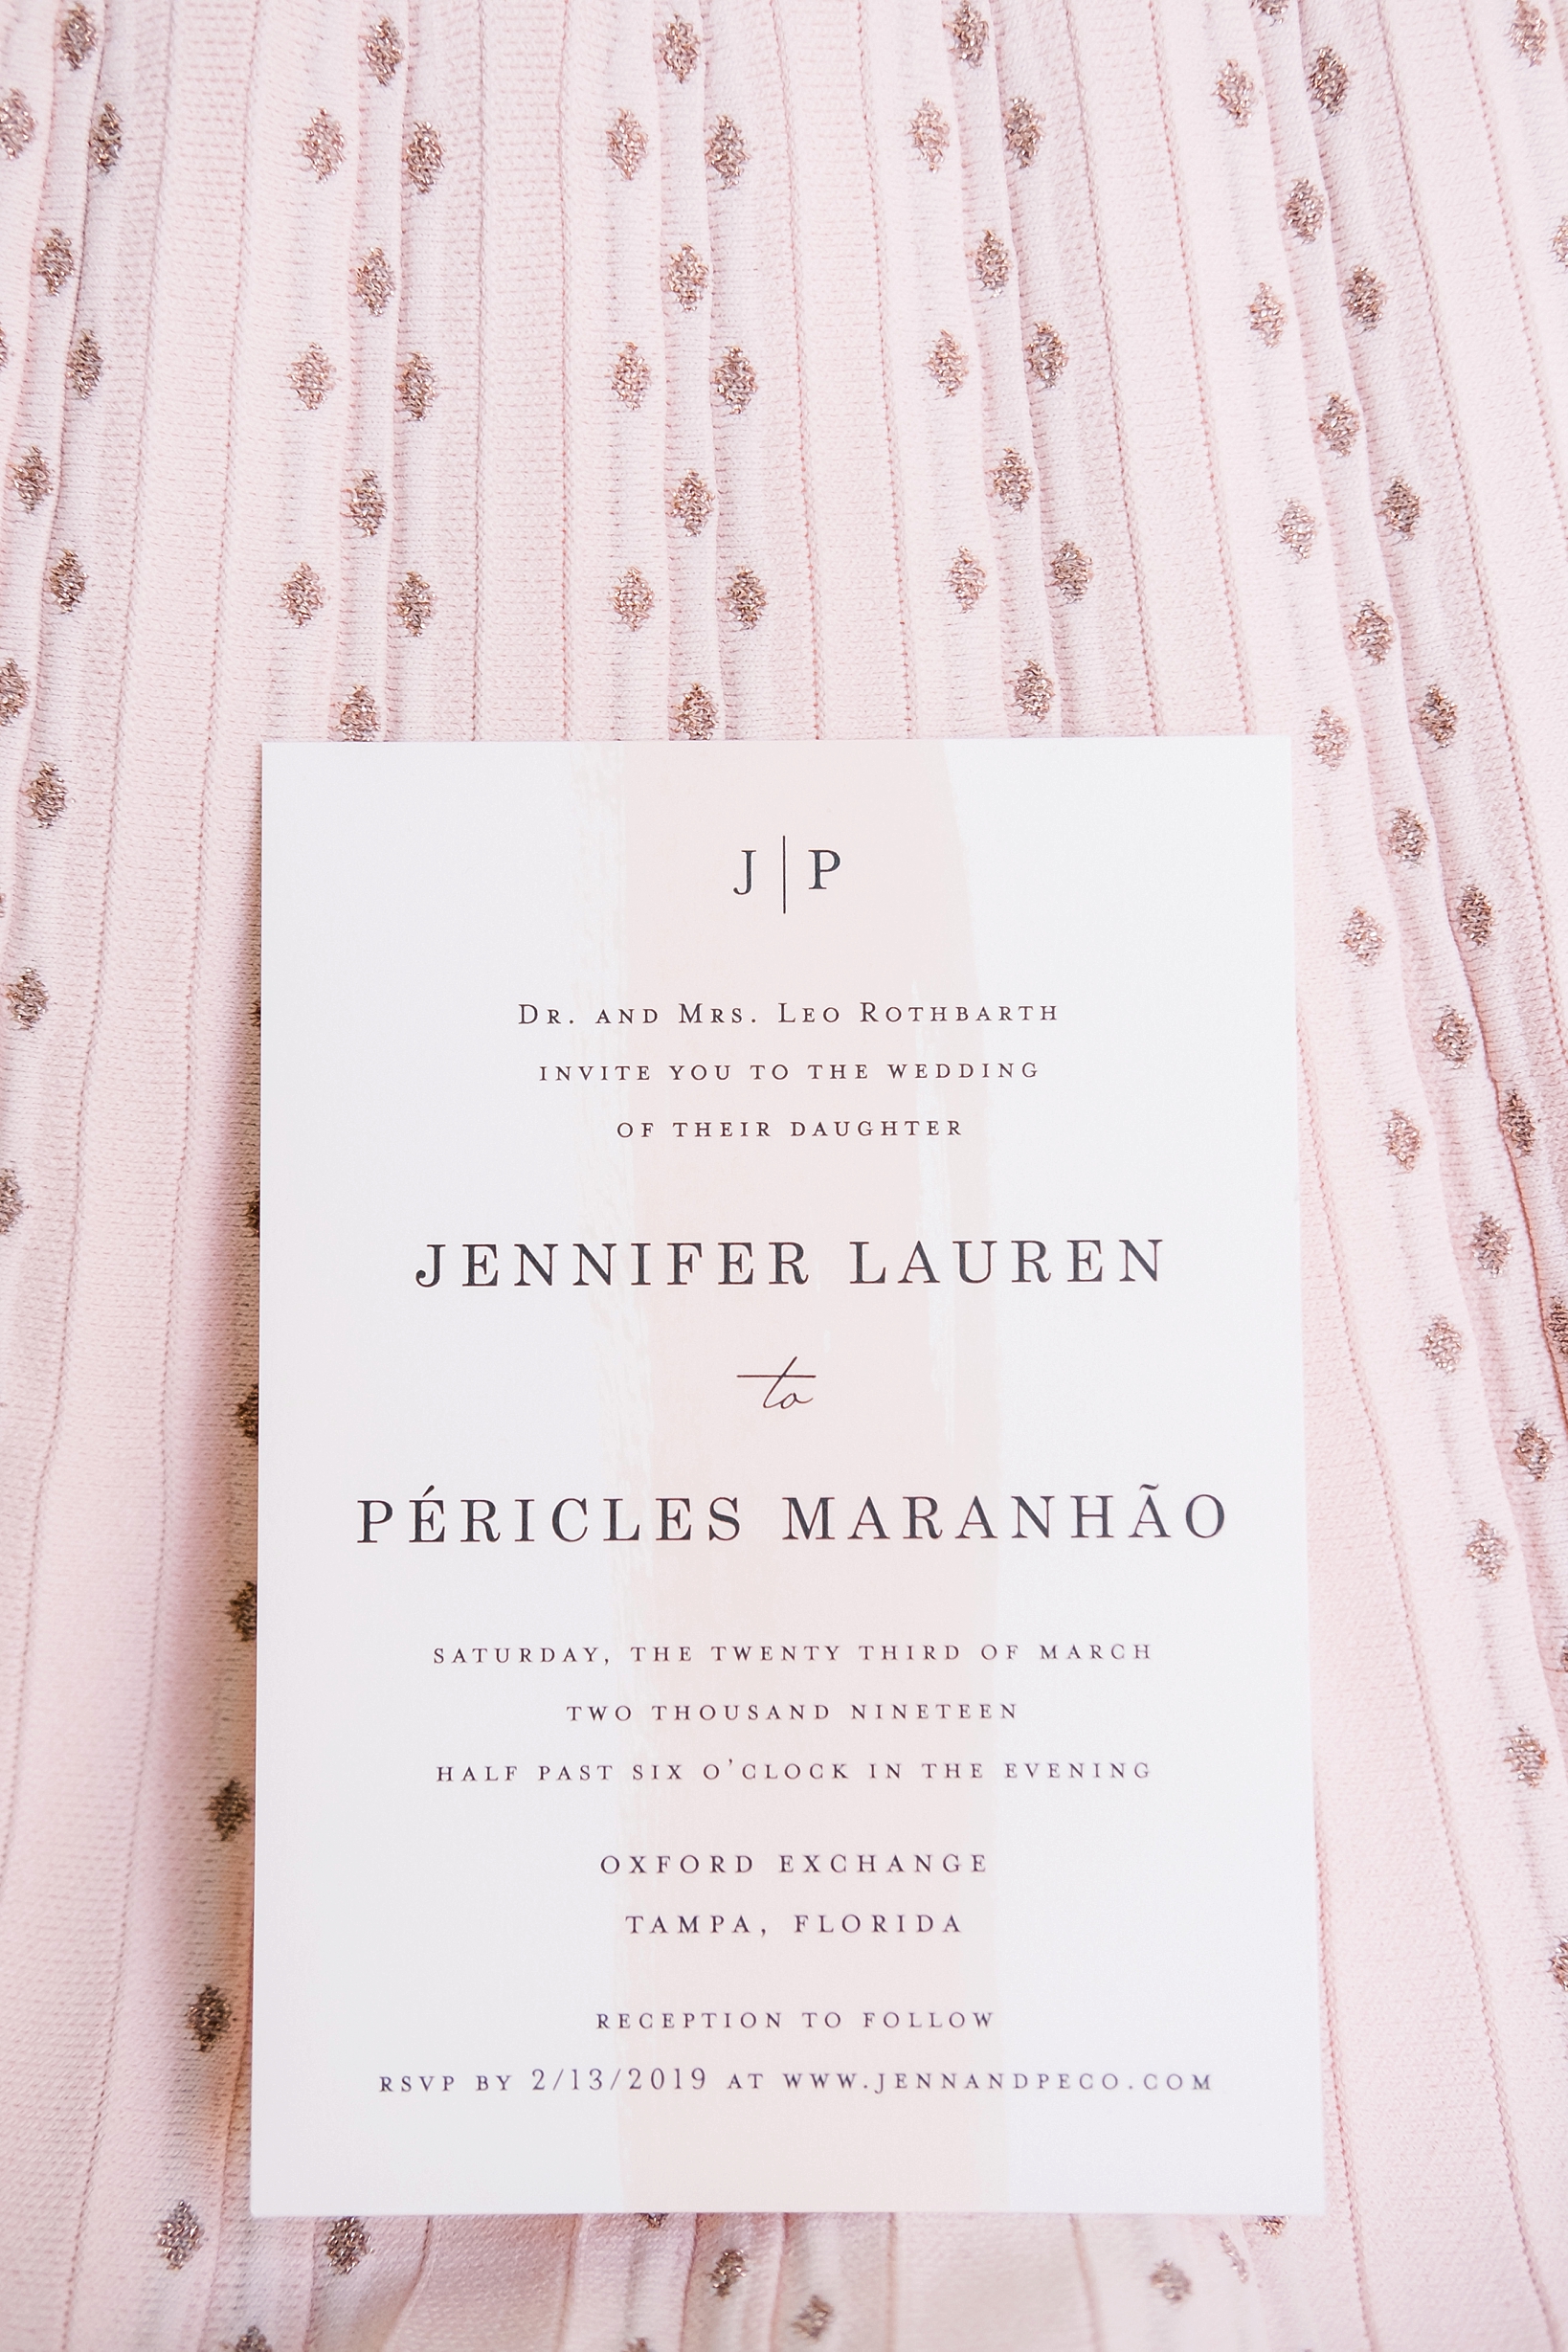 Pink accented wedding invitations to the Bride and Groom's oxford exchange wedding day